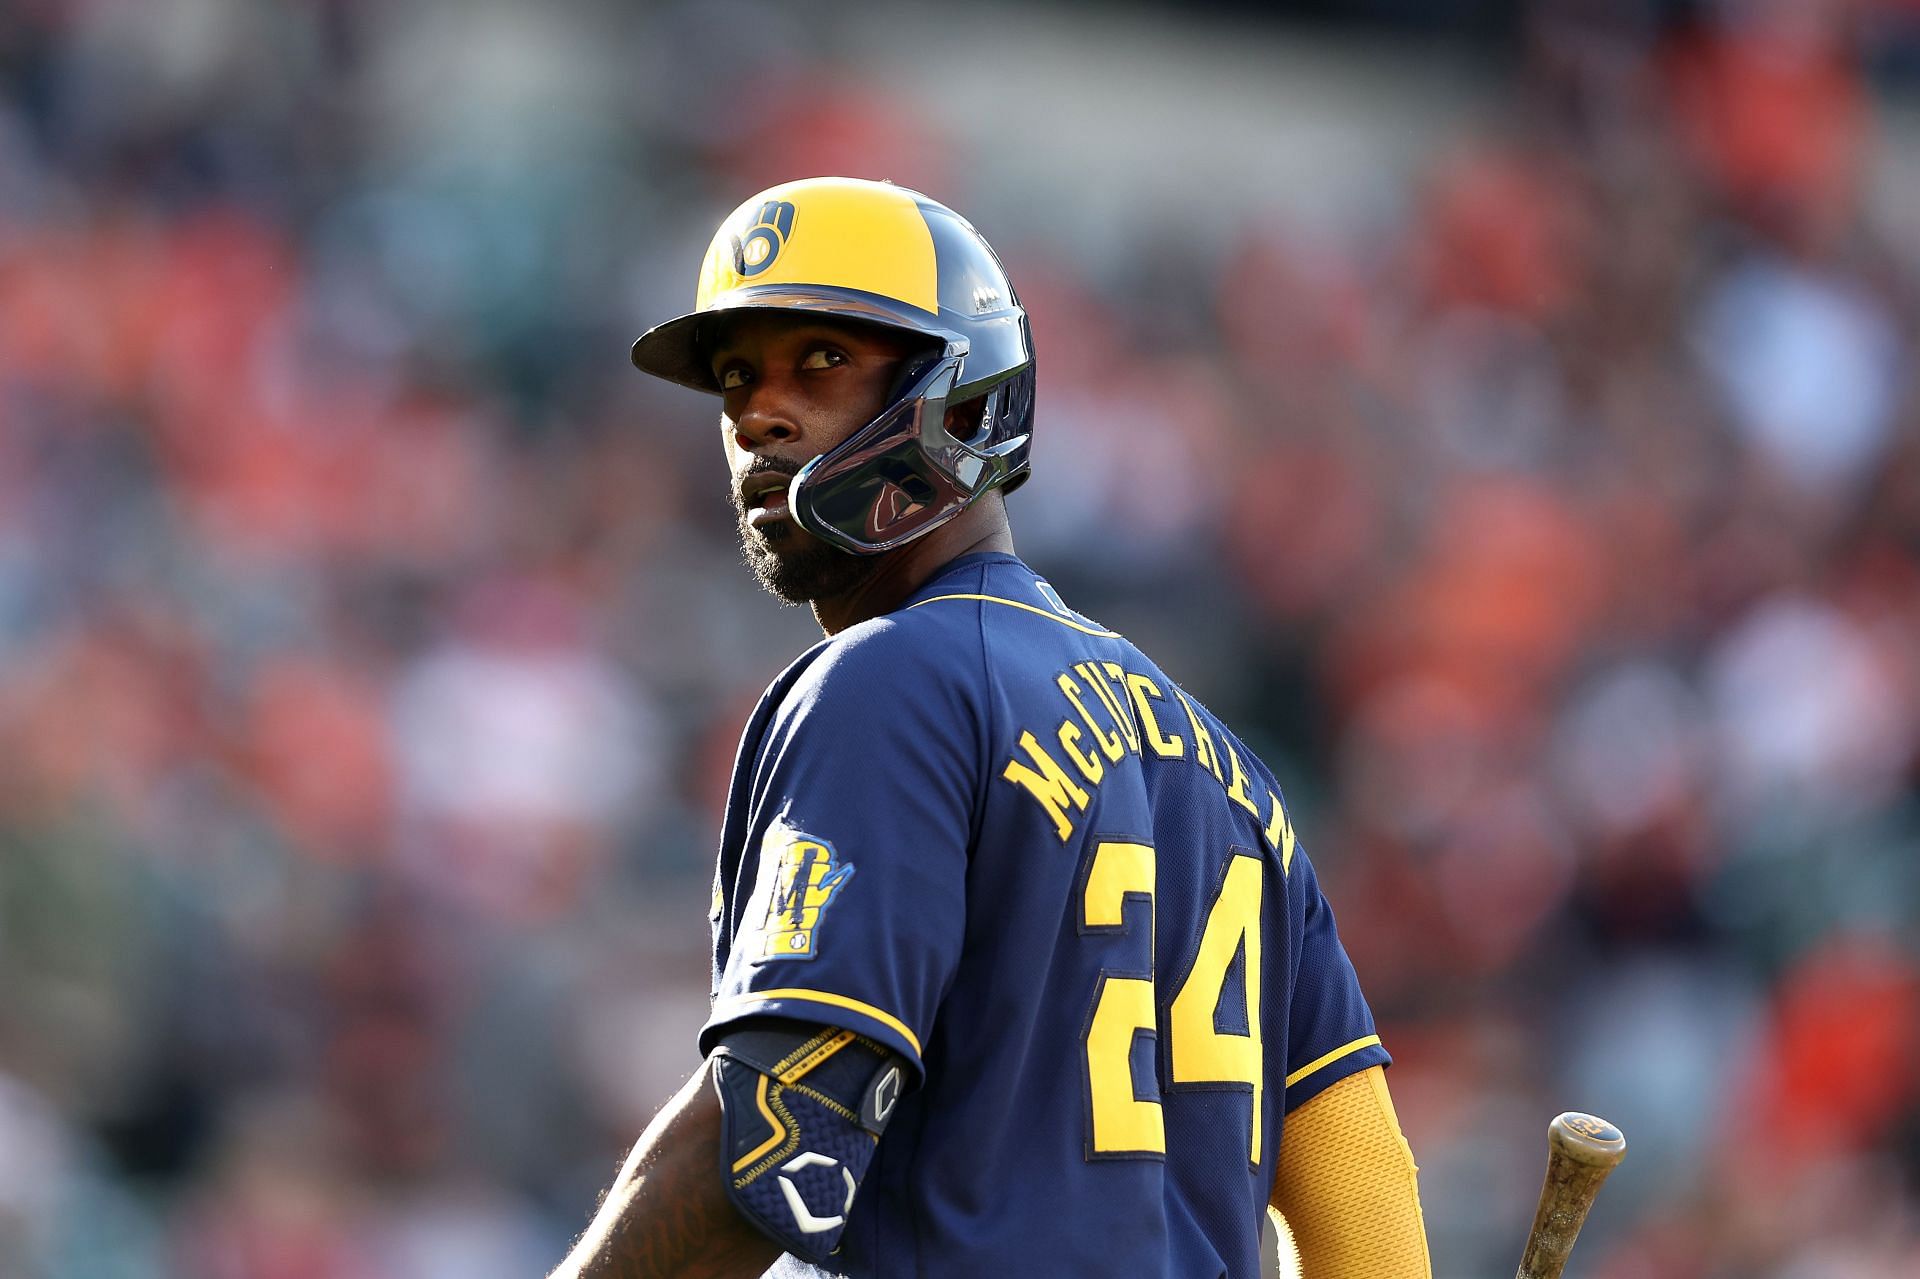 Milwaukee Brewers outfielder Andrew McCutchen joins Mike Trout in